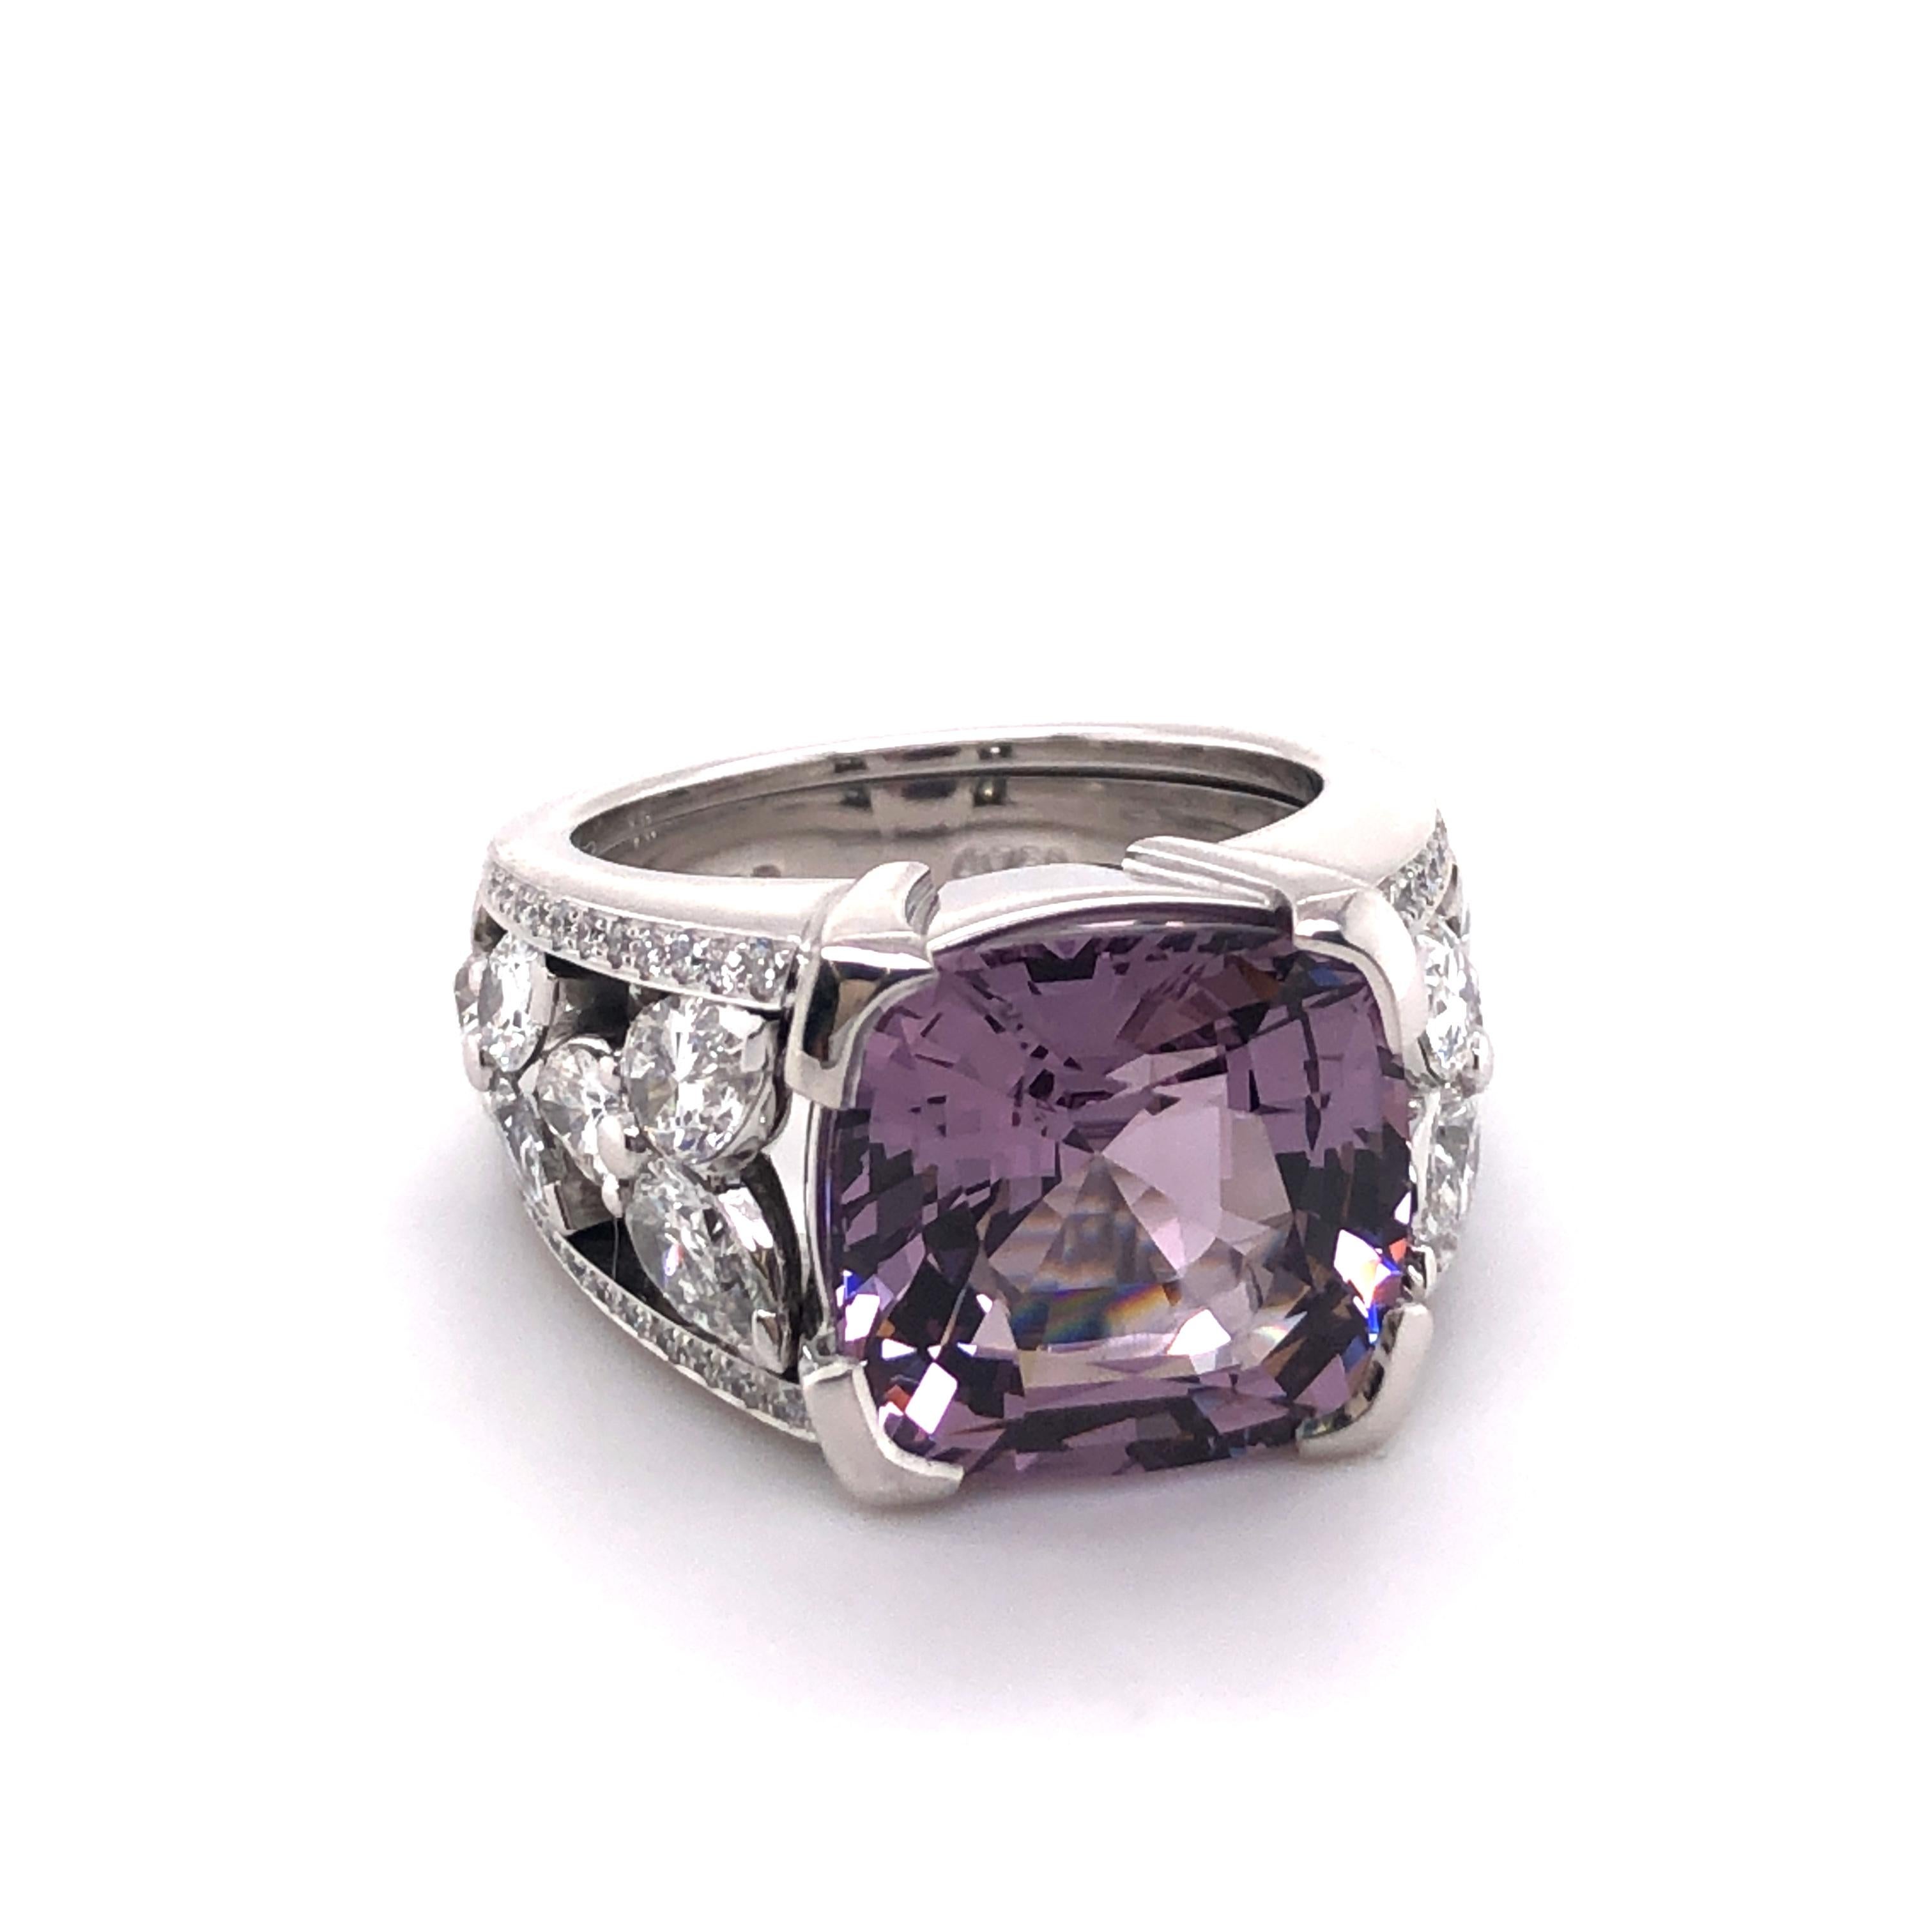 This extraordinary ring in 18 karat white gold is set with a beautiful cushion-shaped violet Burmese spinel of 8.90 carats. The handcrafted mounting is signed Peclard and is set with 12 pear-shaped diamonds and 44 brilliant-cut diamonds of F/G